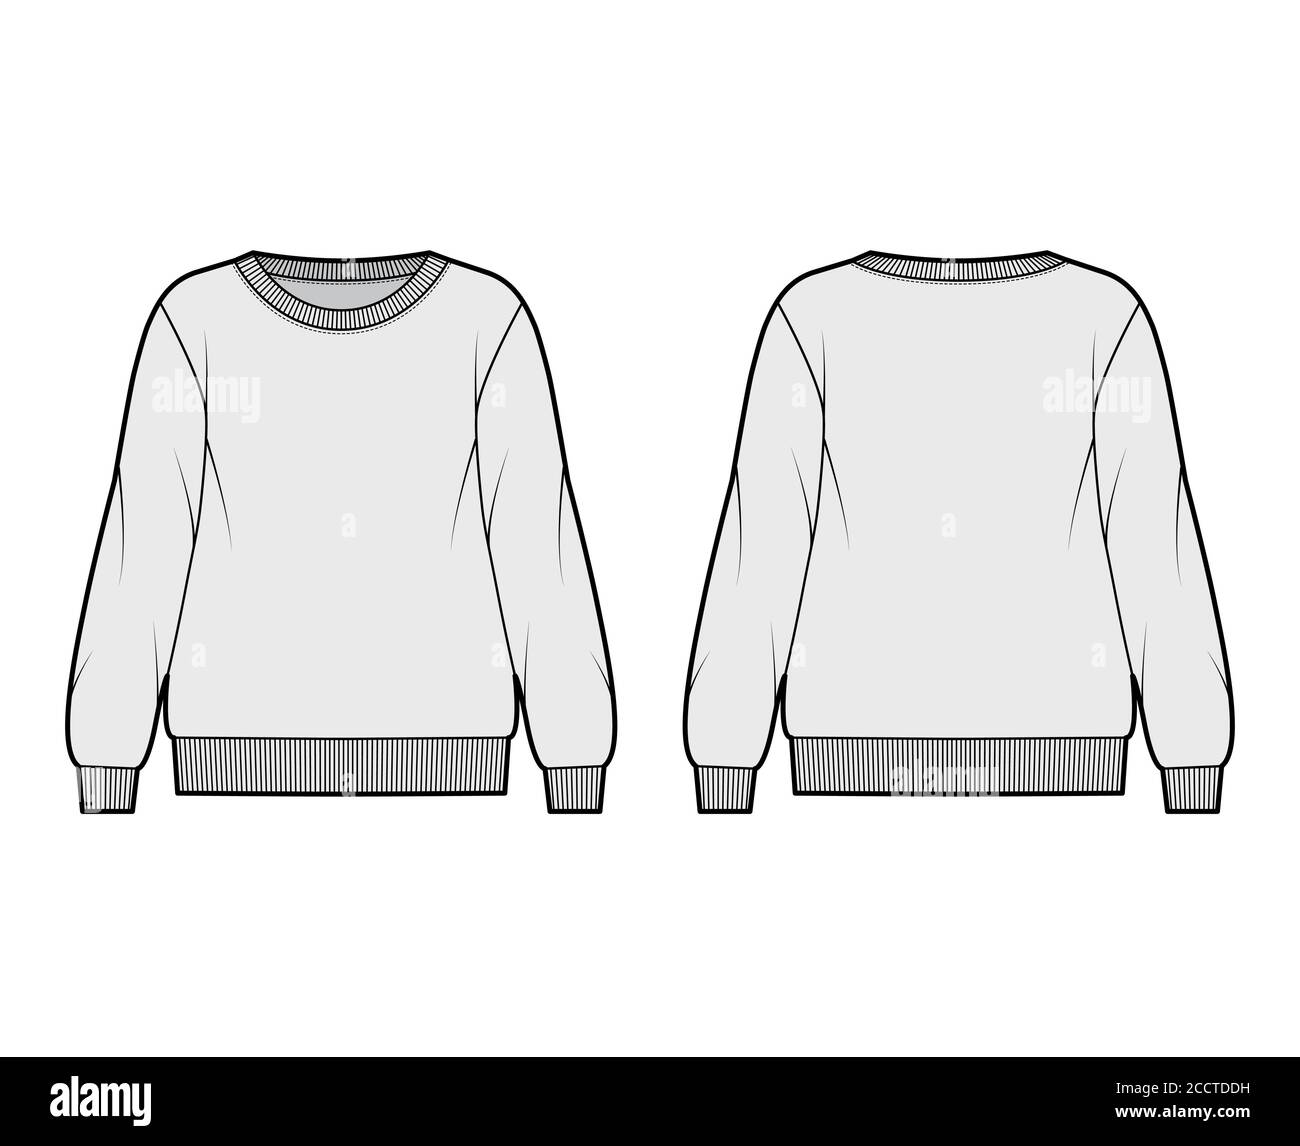 Oversized cotton-terry sweatshirt technical fashion illustration with crew neckline, long sleeves, ribbed trims. Flat outwear jumper apparel template front back grey color. Women, men unisex top CAD Stock Vector